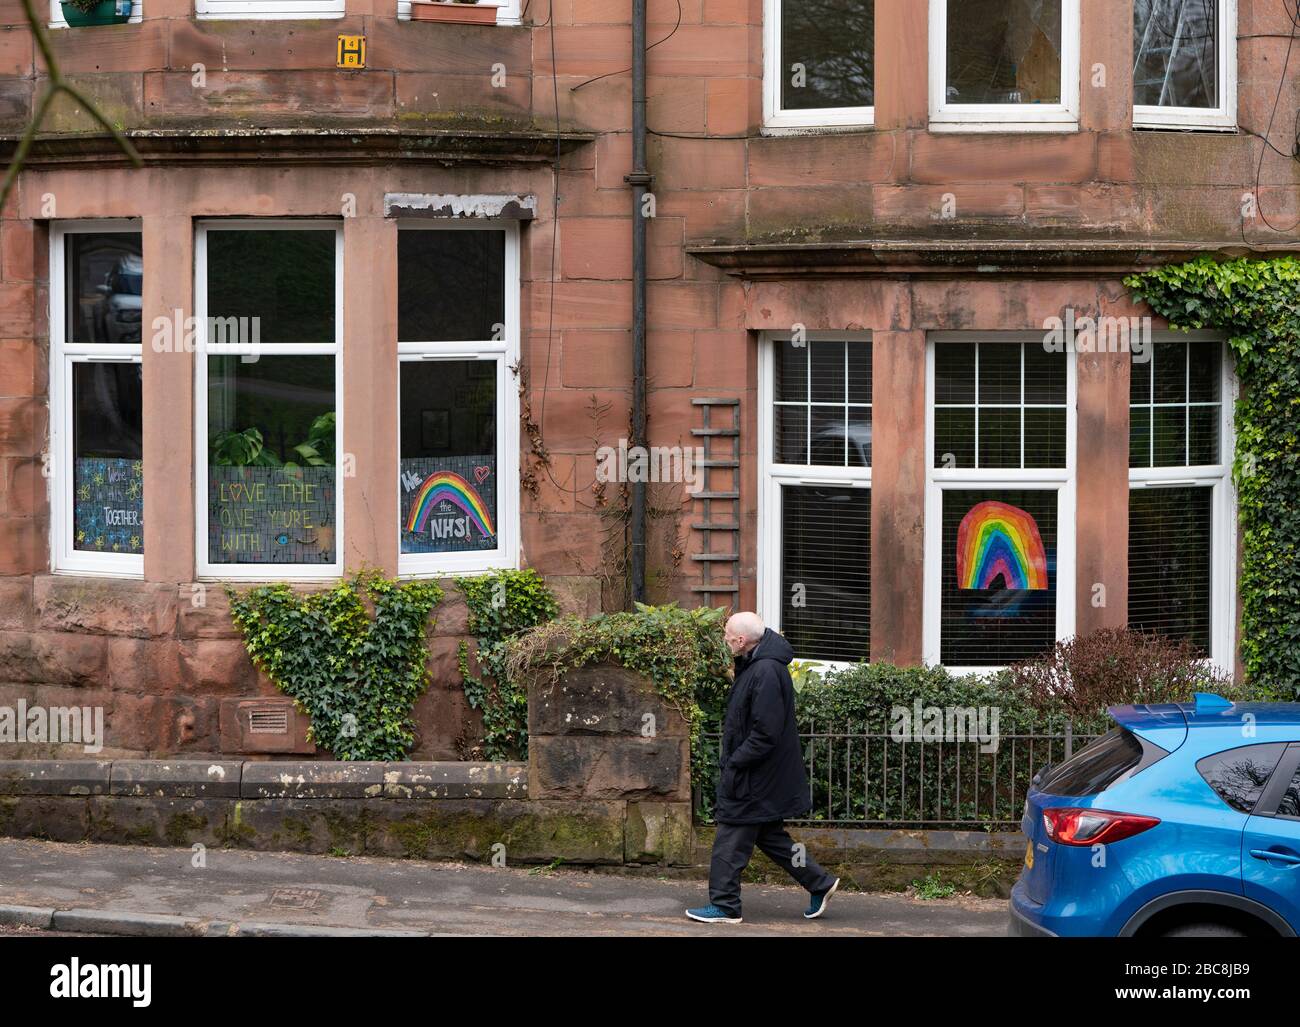 Glasgow, Scotland, UK. 3 April, 2020. Images from the south side of Glasgow at the end of the second week of Coronavirus lockdown. Pictured; hand drawn rainbows and messages in windows of flat in Shawlands. Iain Masterton/Alamy Live News Stock Photo